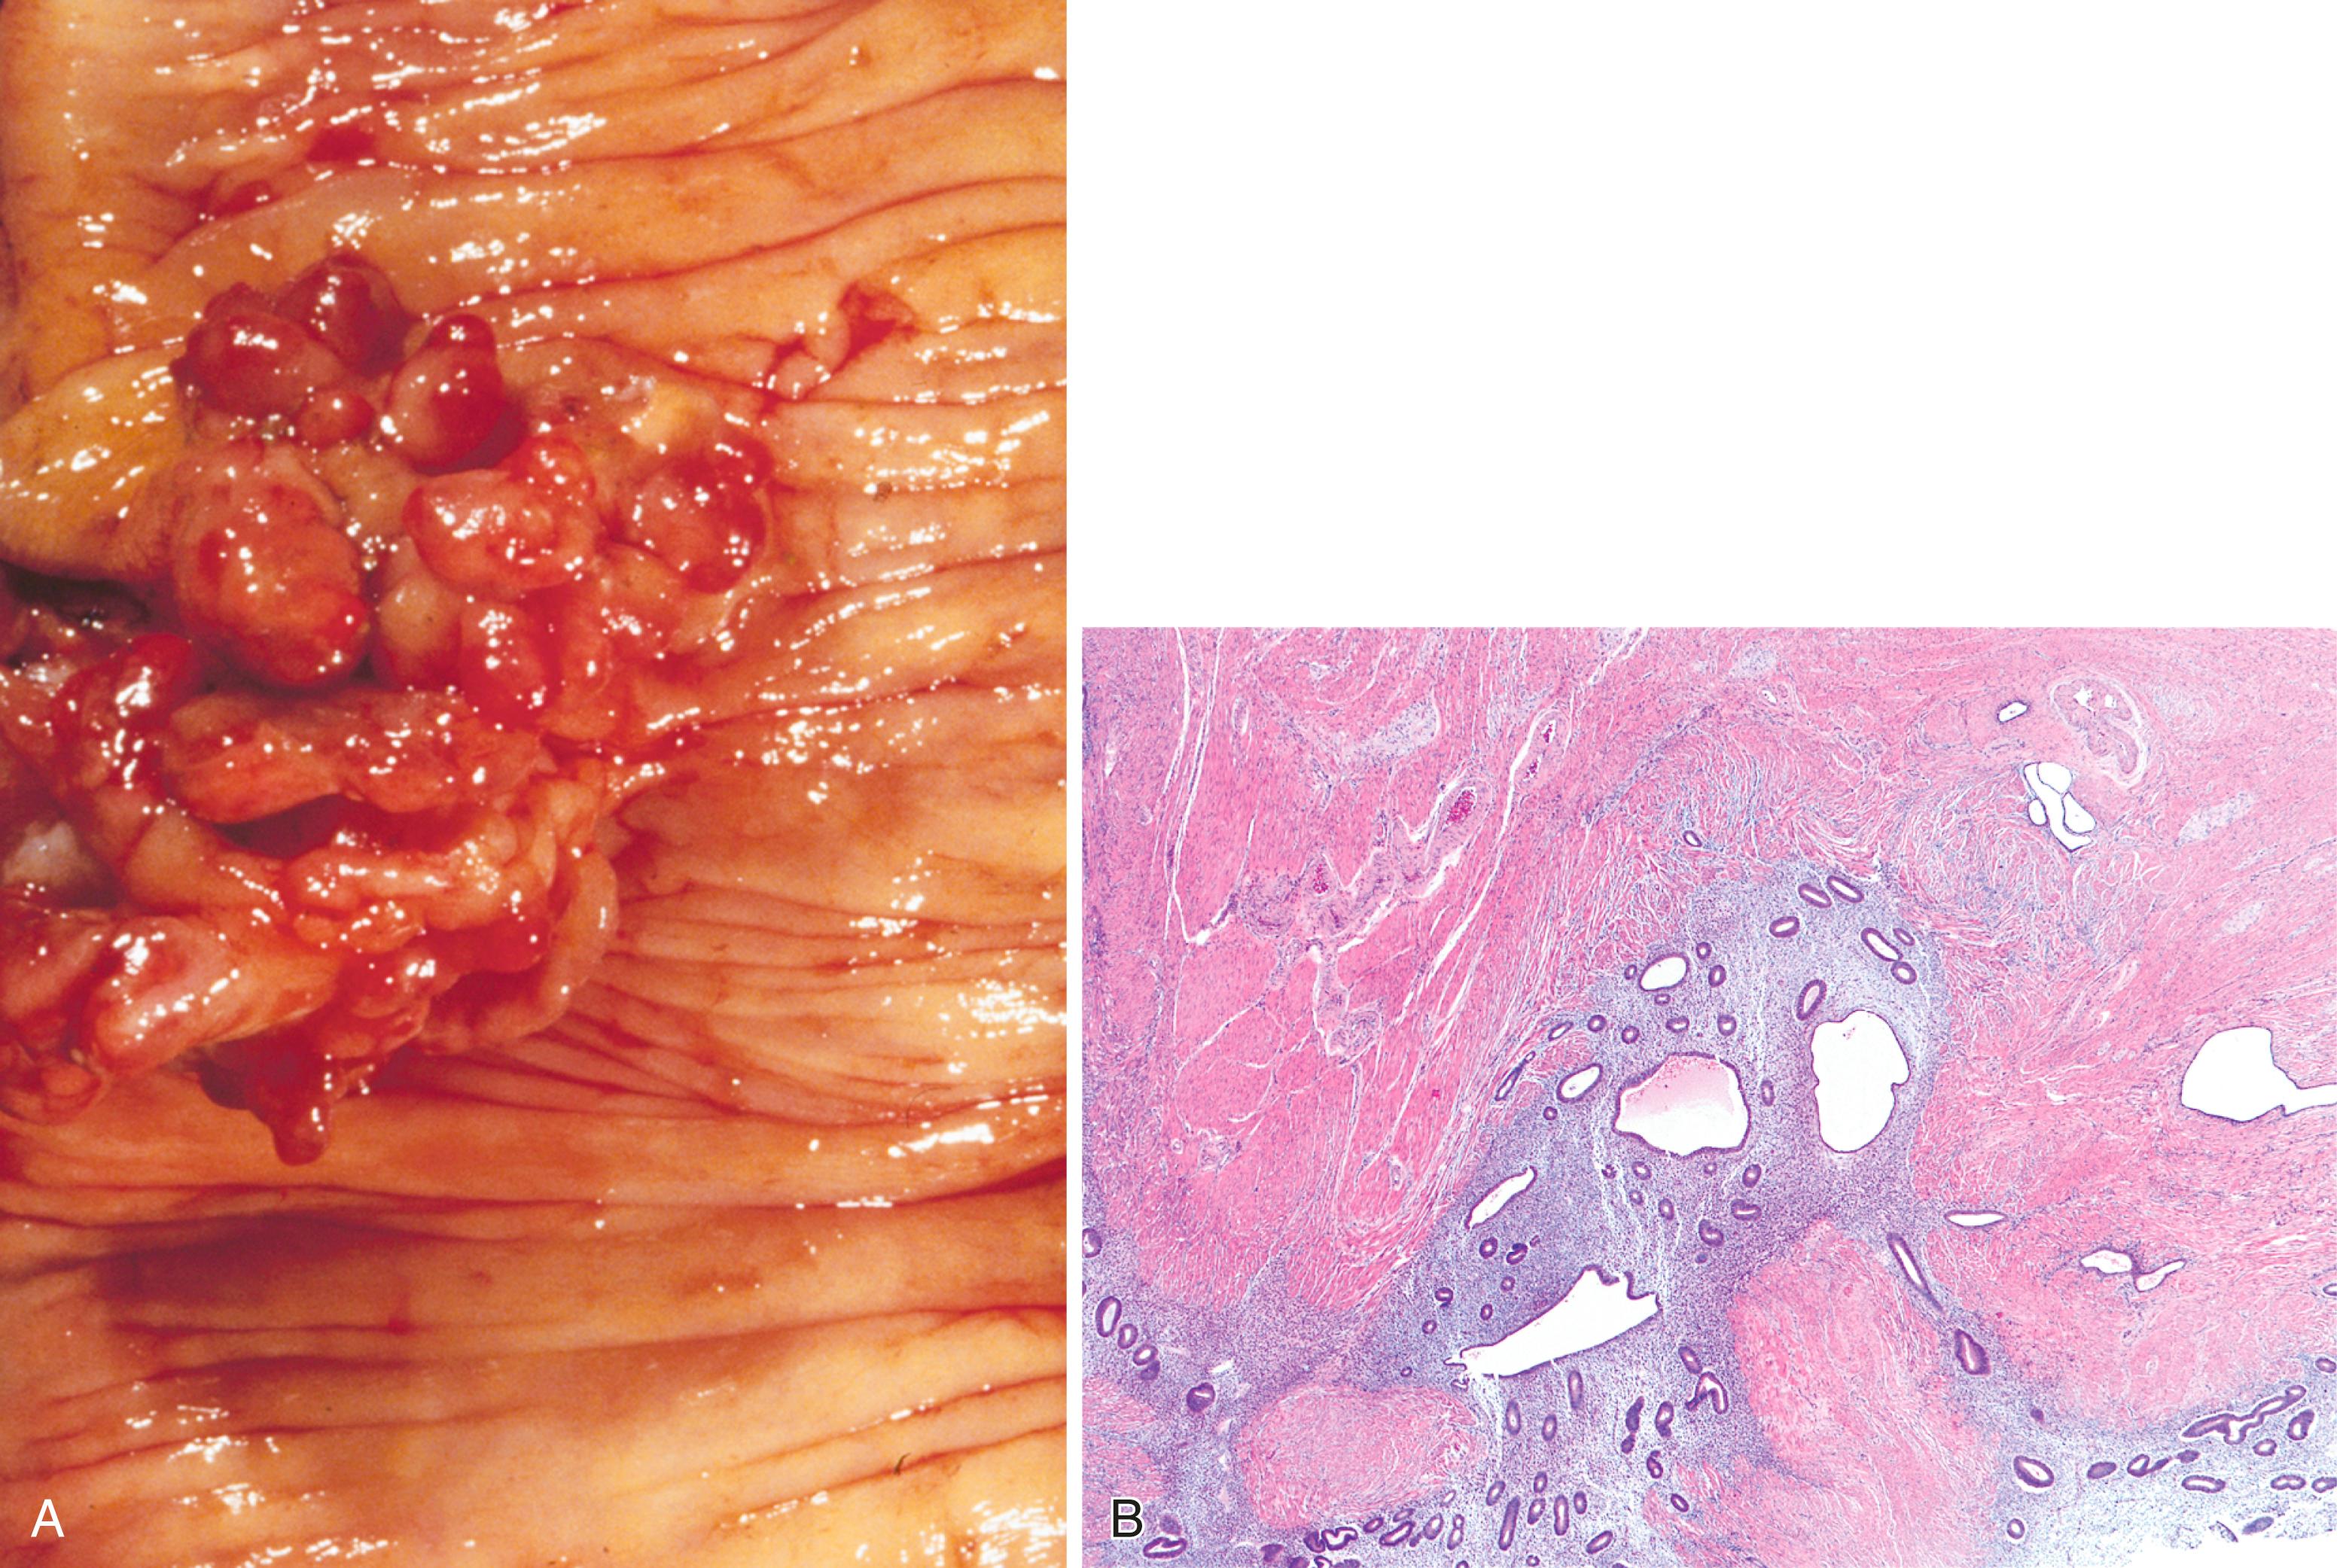 FIGURE 21.3, Endometriosis of the small intestine. A, Multiple erythematous polypoid lesions in an area of endometriosis. B, Rounded aggregates of endometrial glands and stroma infiltrate the muscularis propria.